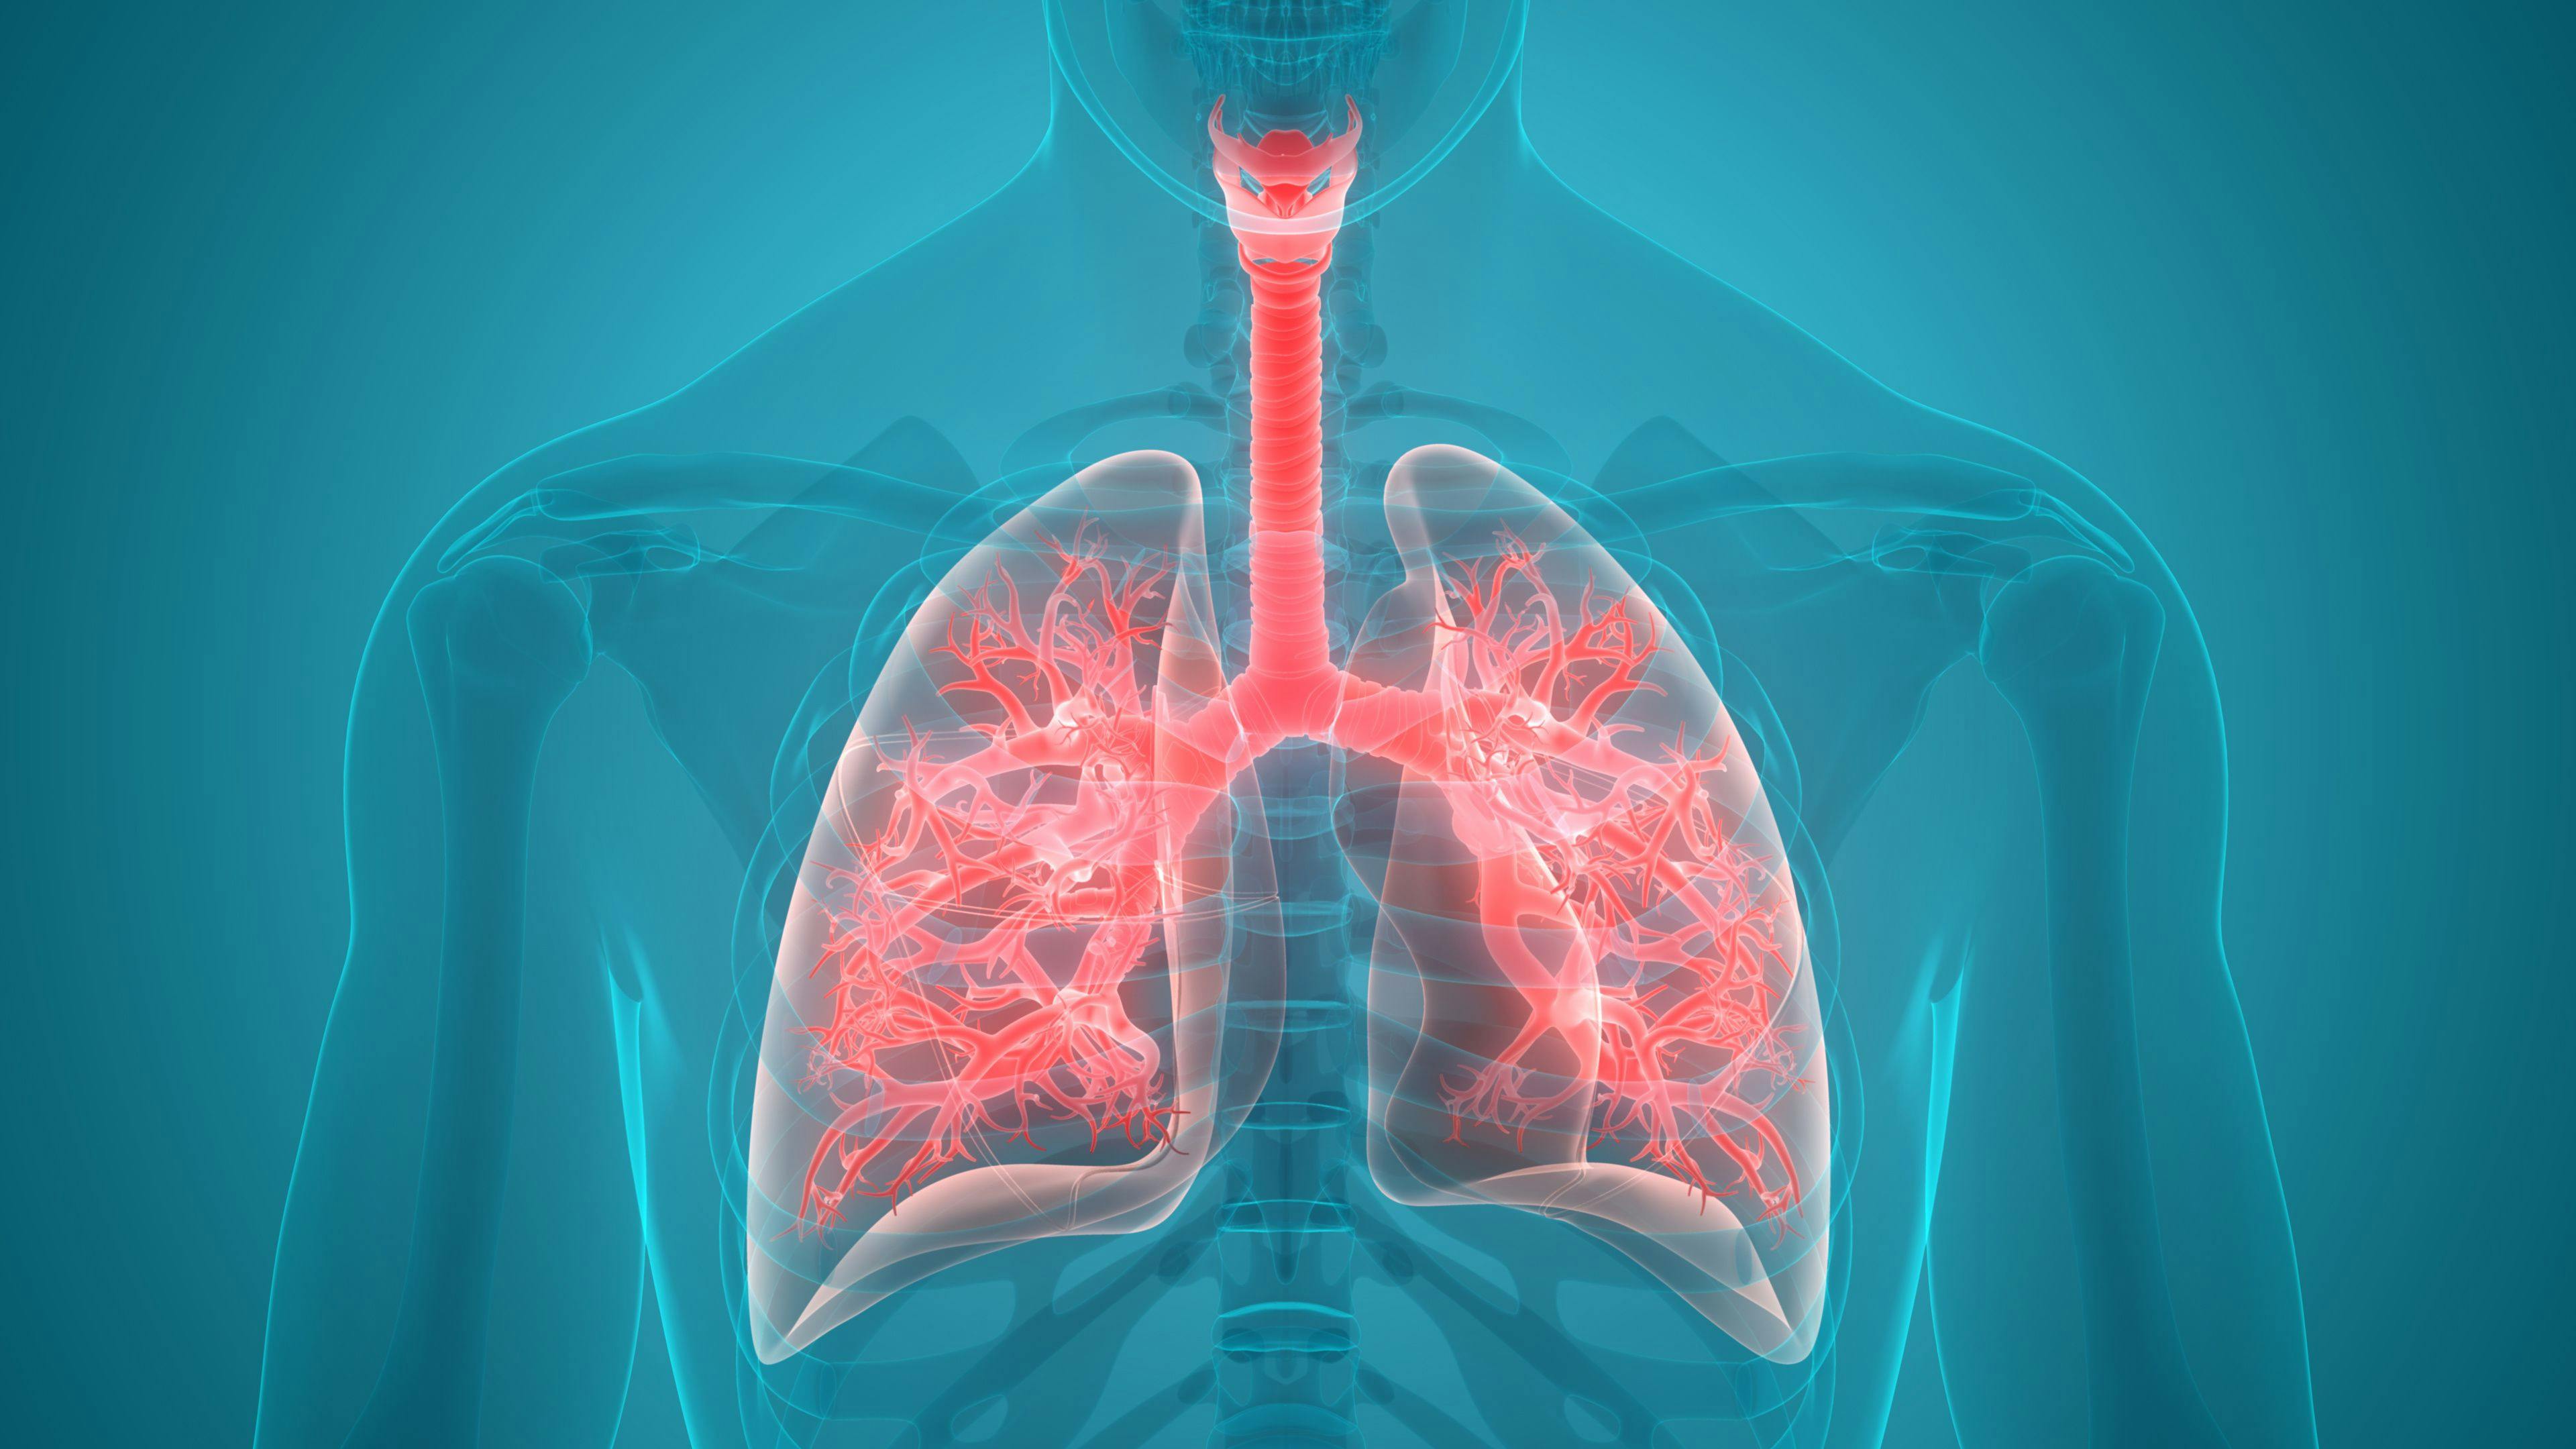 How Effective is Anakinra in Patients With Severe COVID-19 Pneumonia?